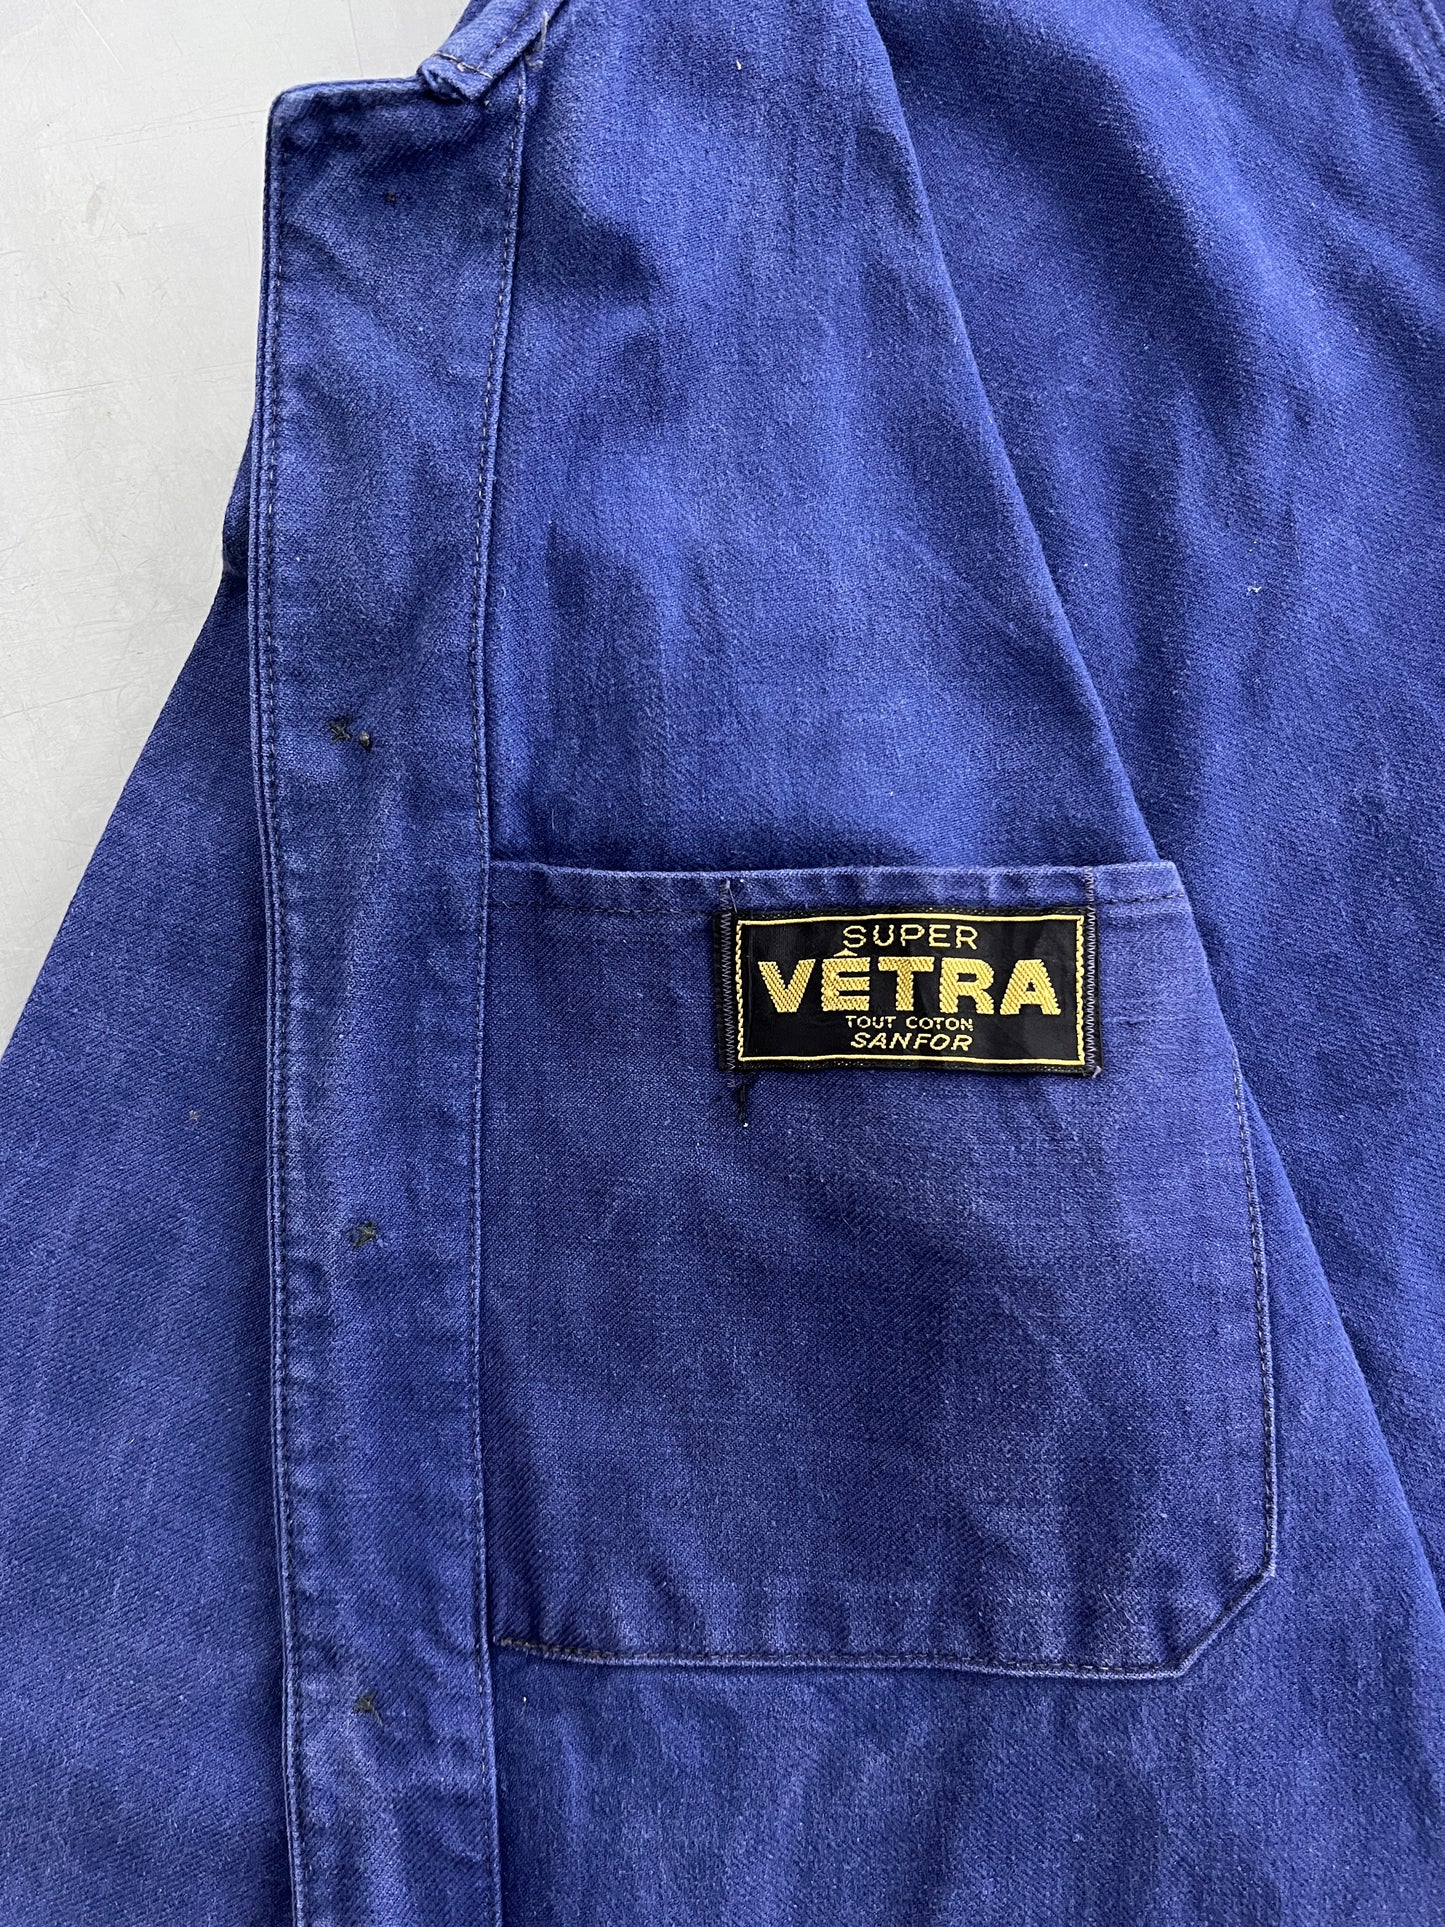 VETRA French Canvas Work Jacket [M/L]